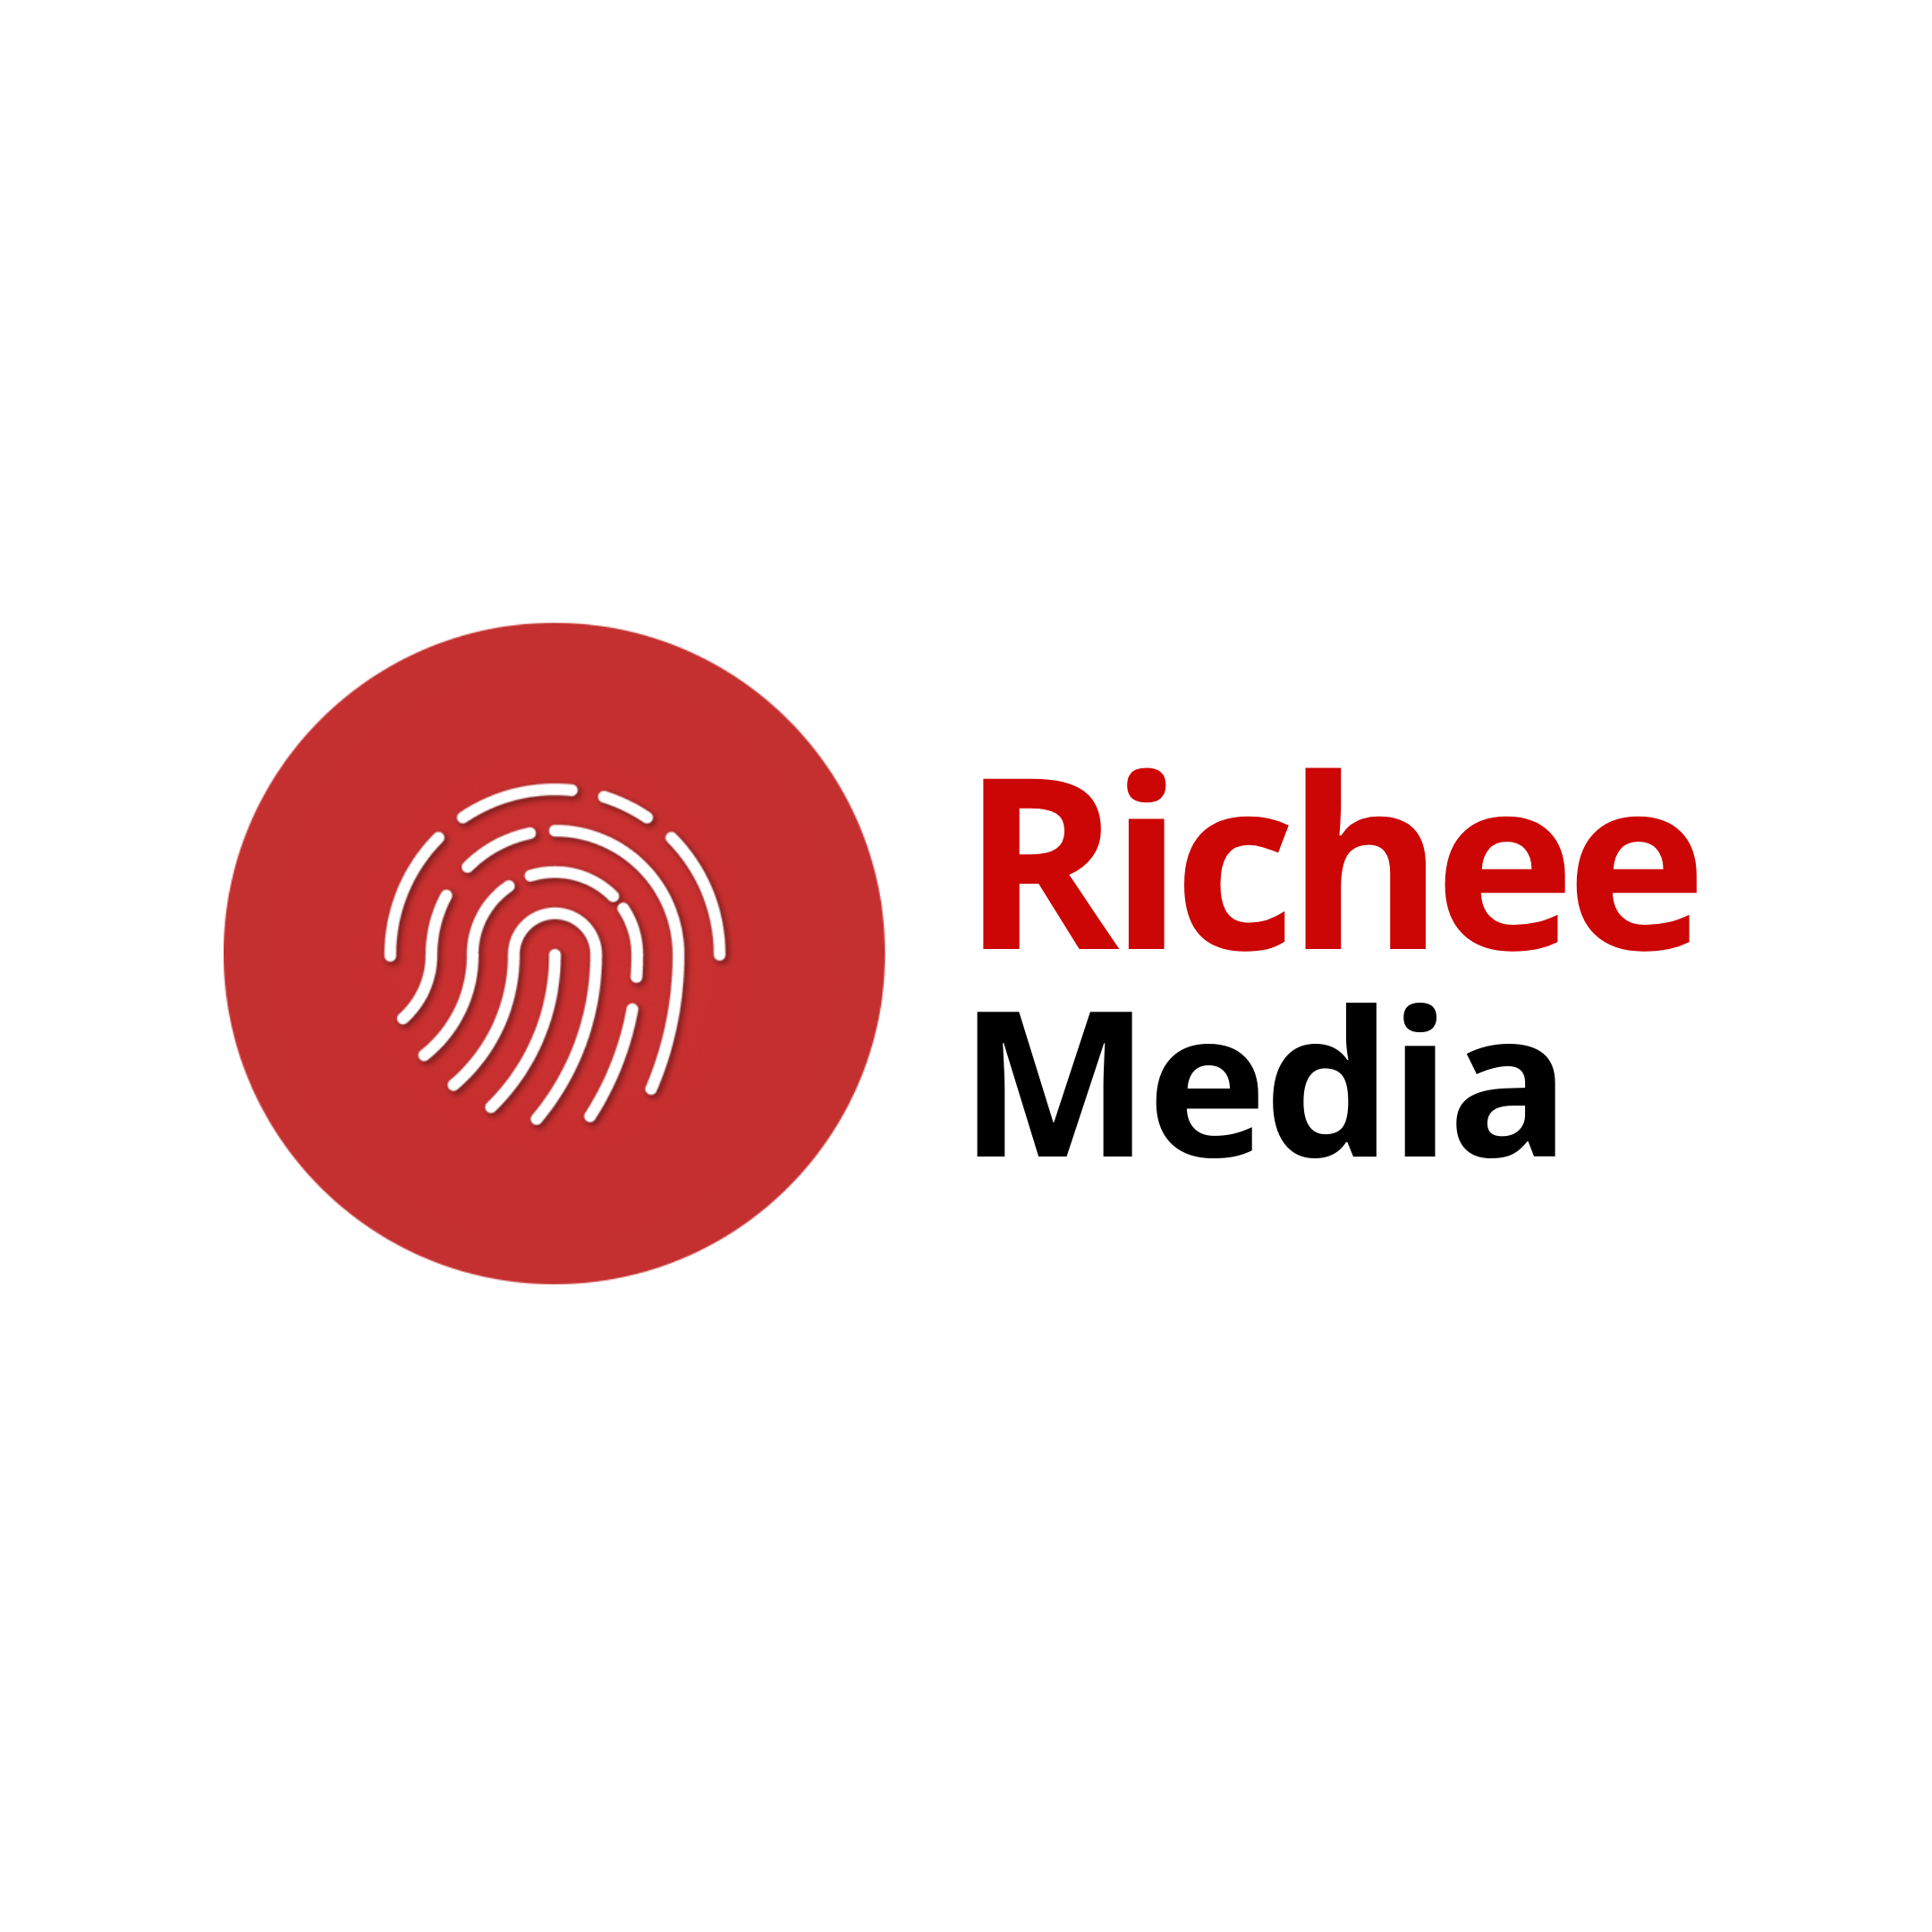 Richee Media profile on Qualified.One